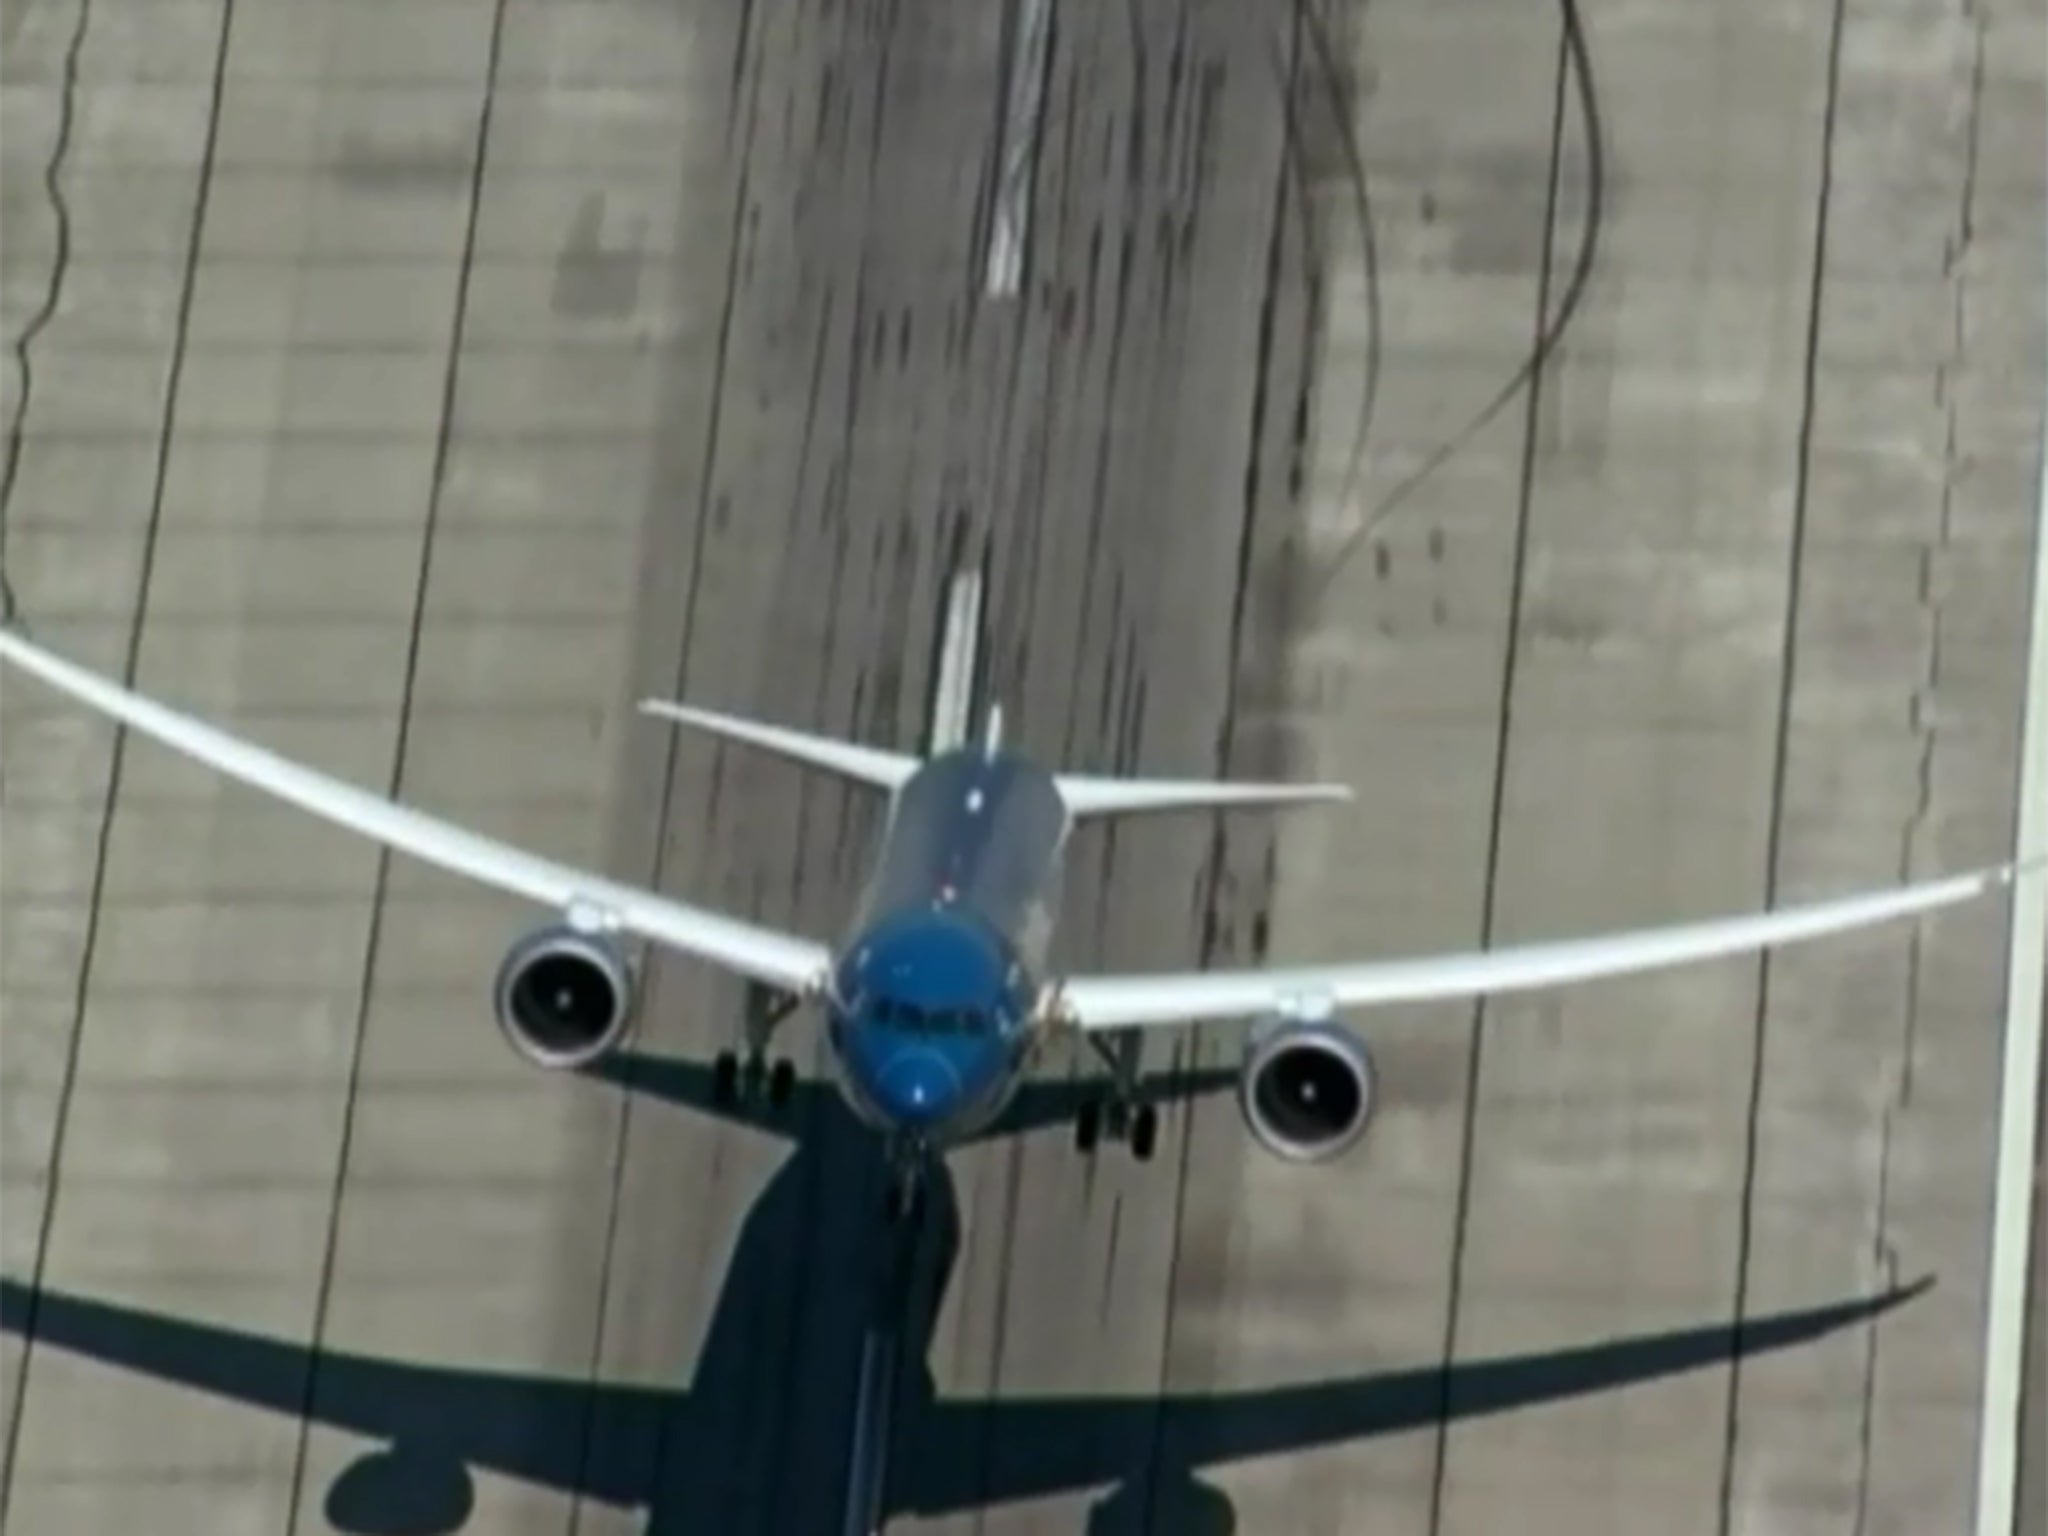 Boeing S New Dreamliner Performs Near Verticle Take Off Video The